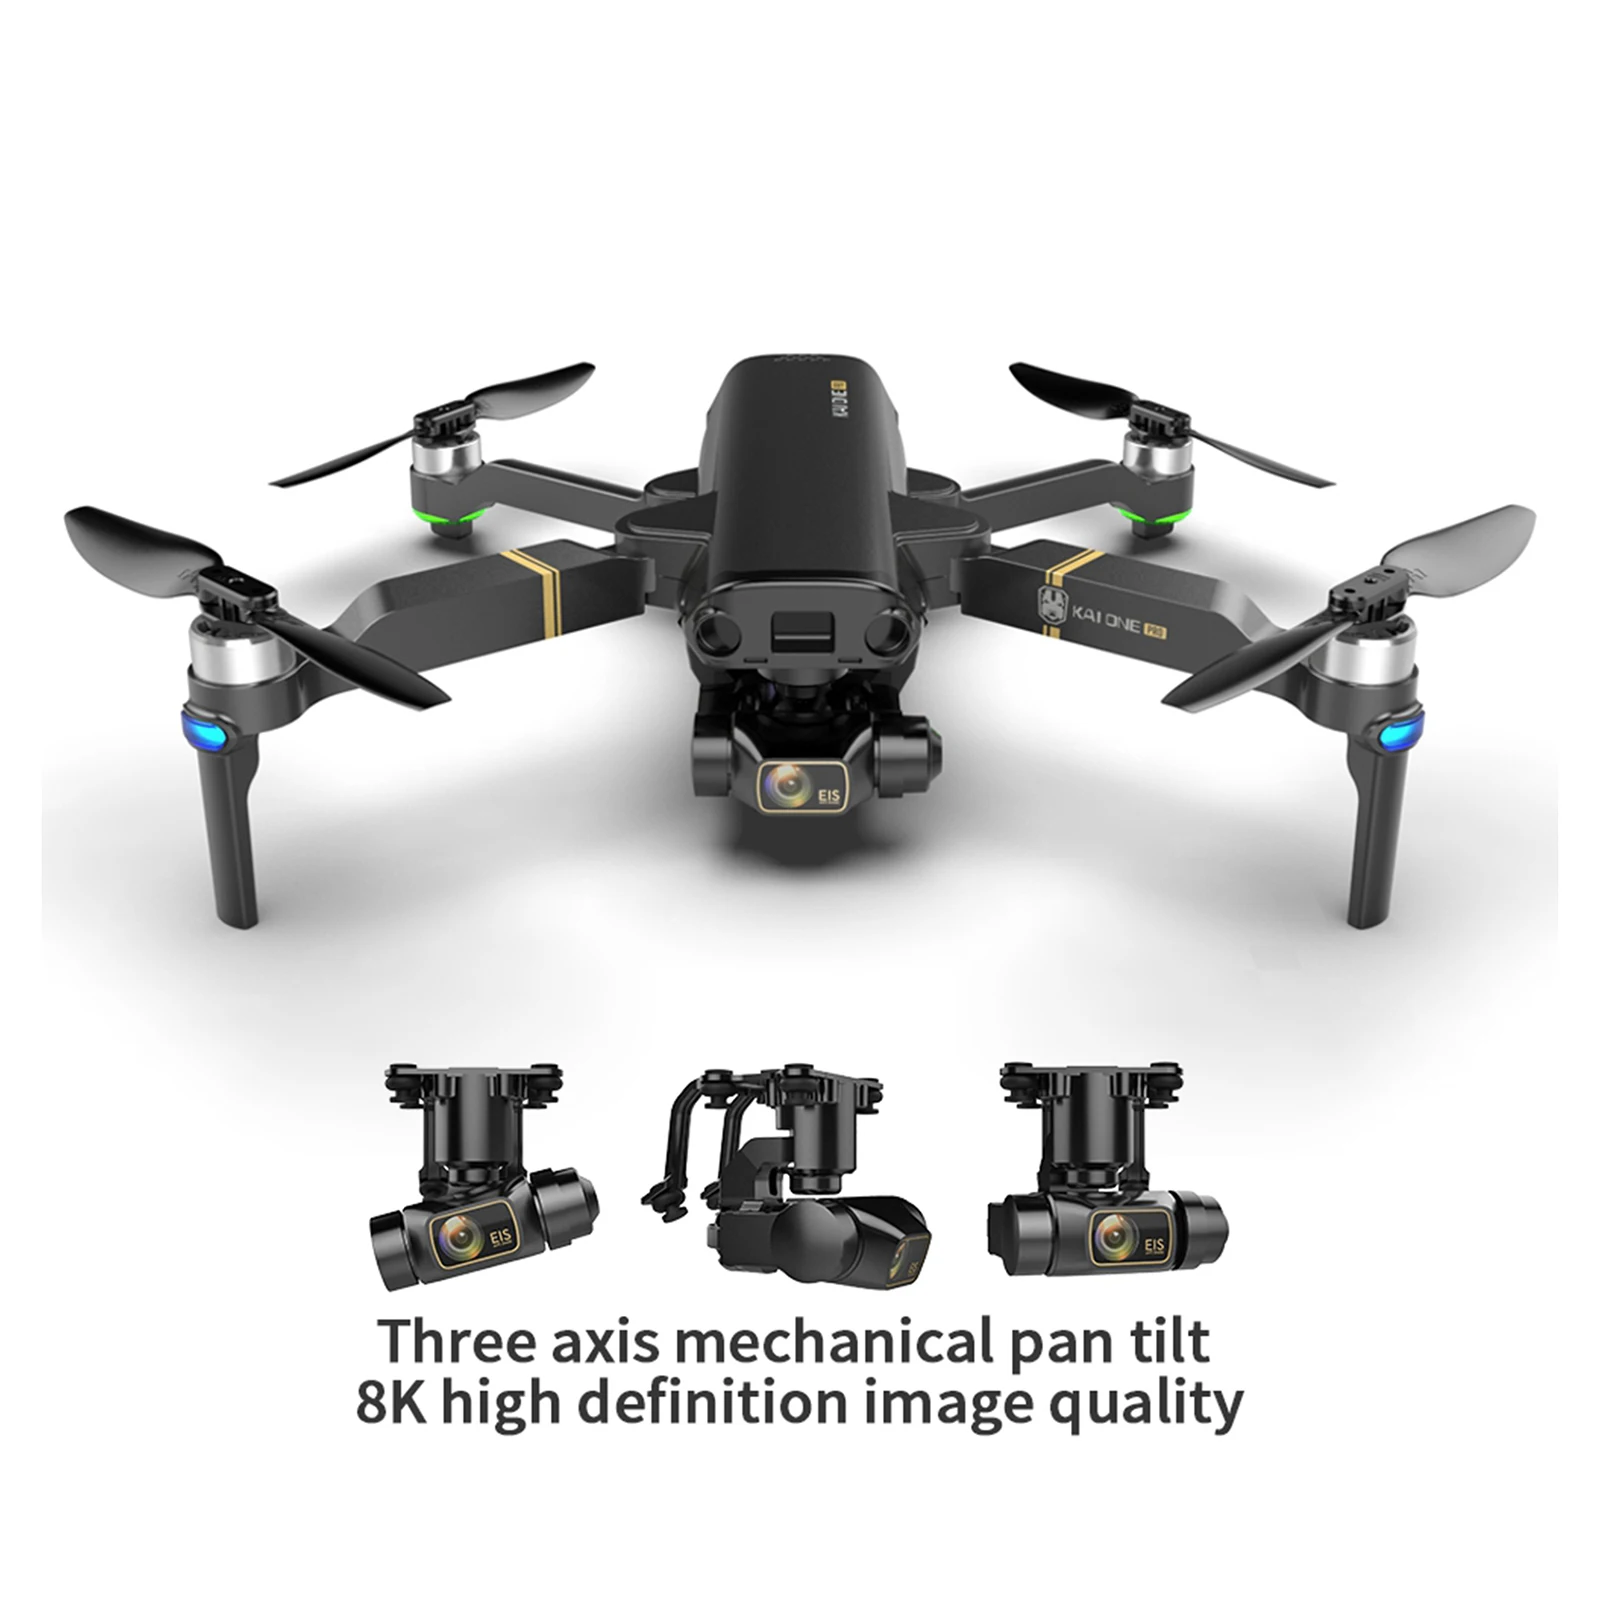 KAI One Pro GPS Drone Foldable FPV RC Quadcopter 3-Axis Gimbal Auto Return Folding RC Drone Quadcopter Aircraft HD Camera